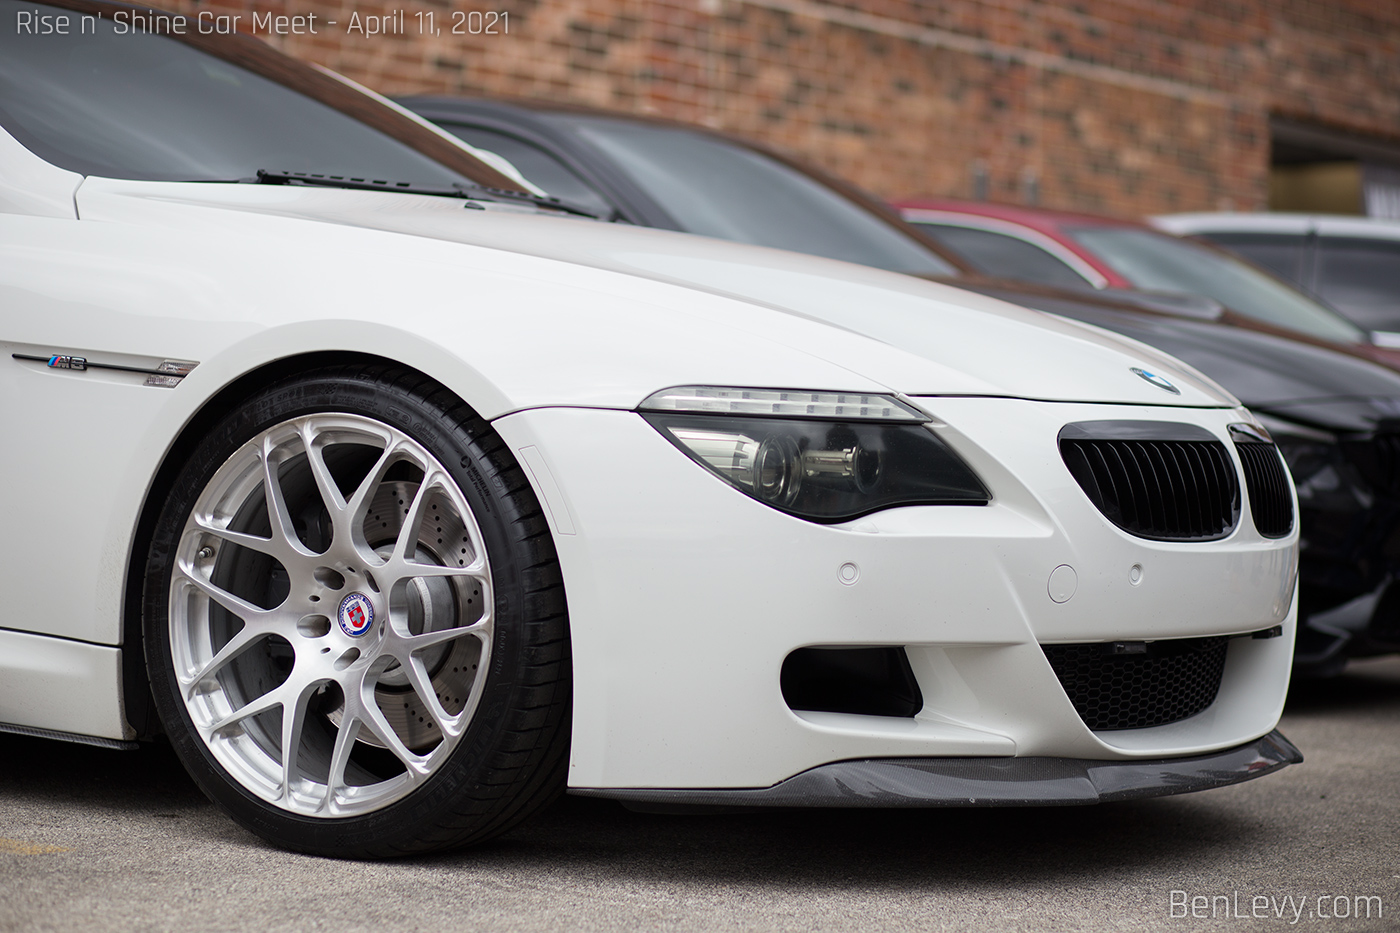 E63 BMW M6 with HRE P40 Wheels